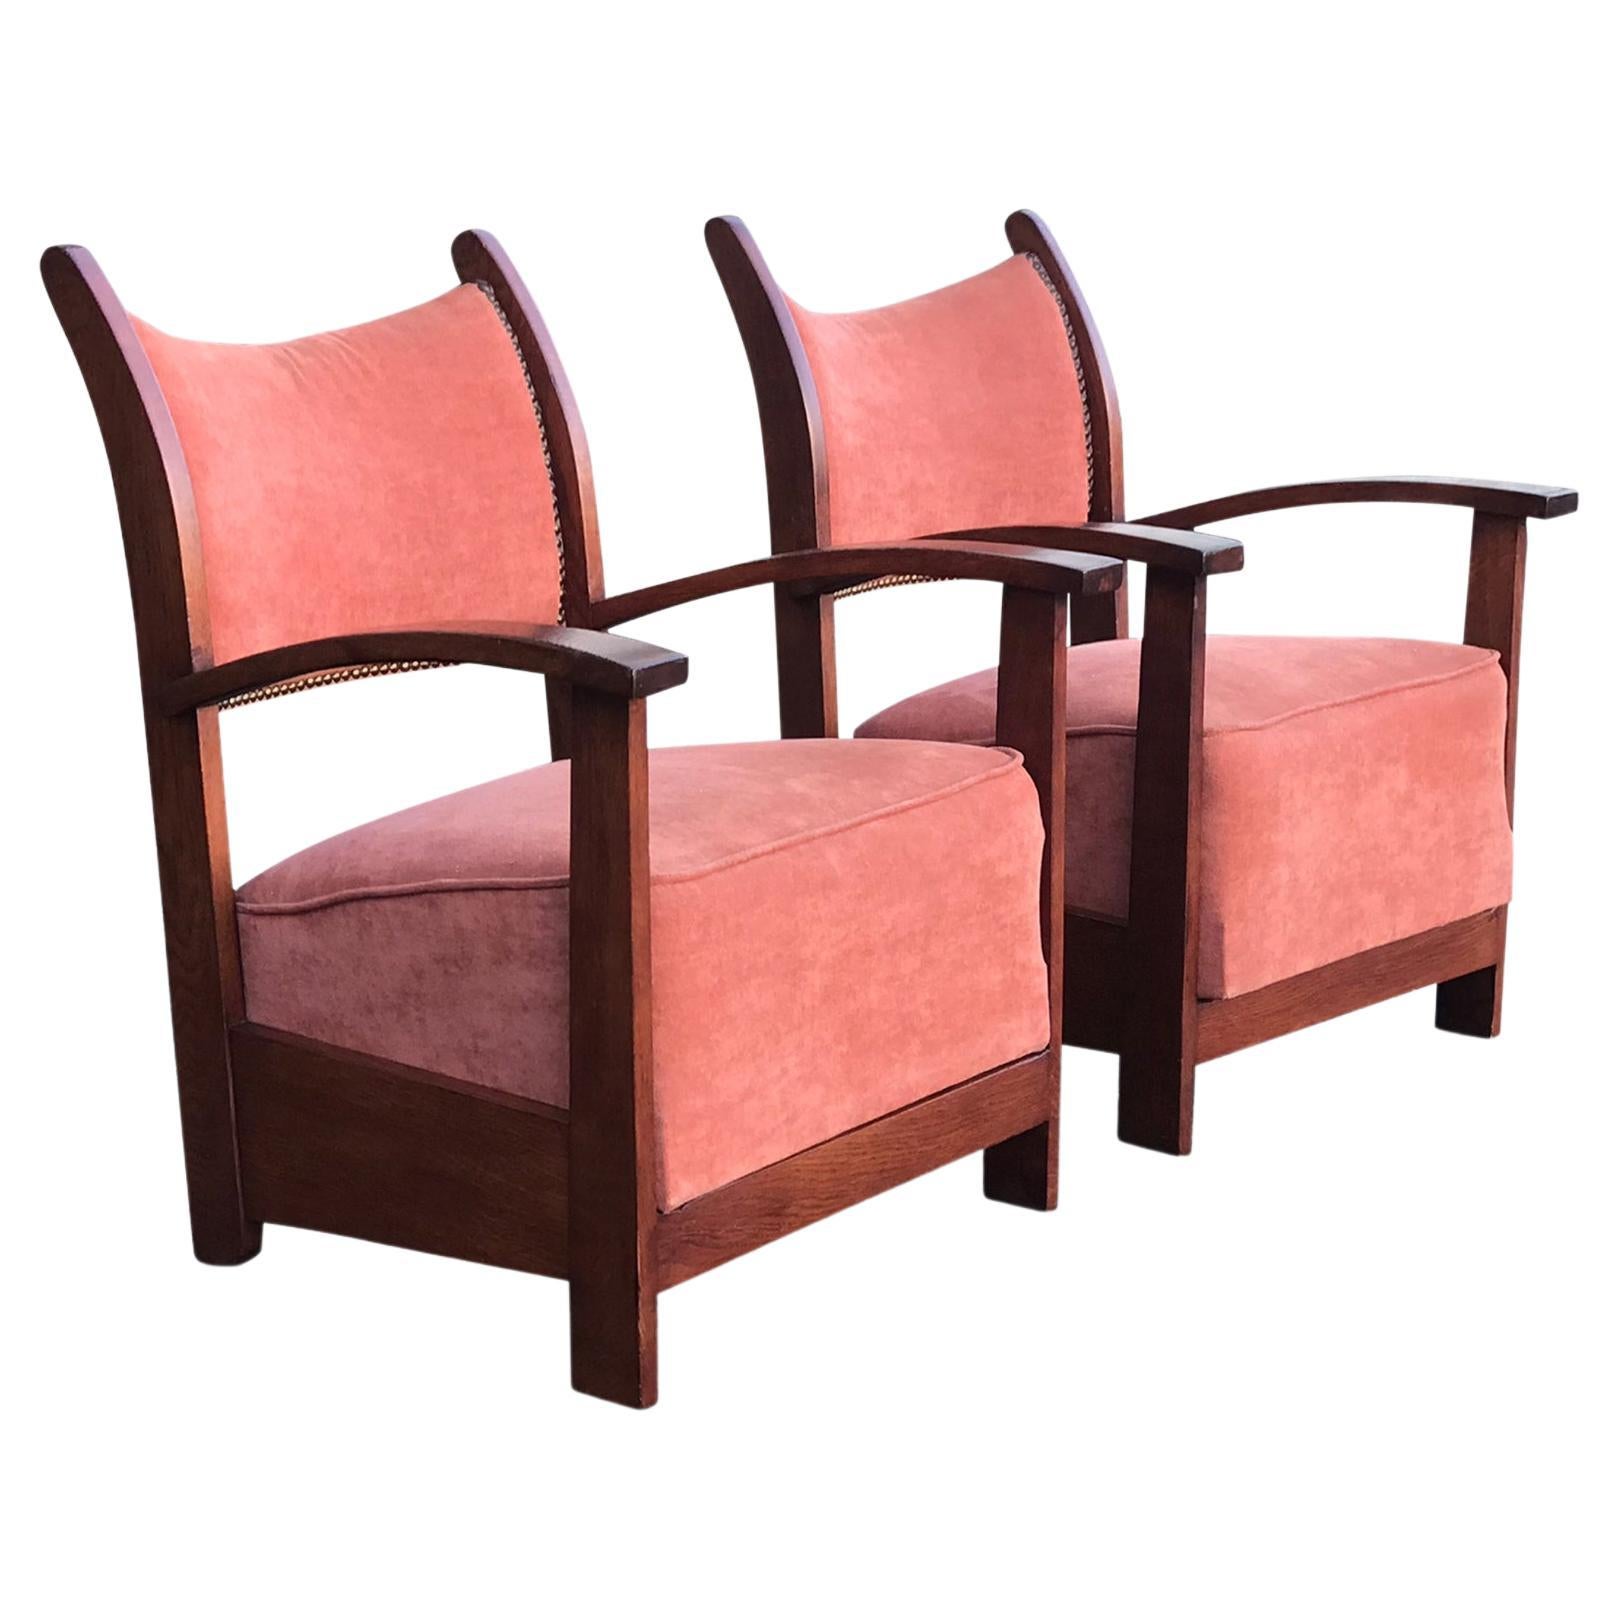 Low Oak and Tweed Armchairs Amsterdamse School 1930s, Set of 2 For Sale